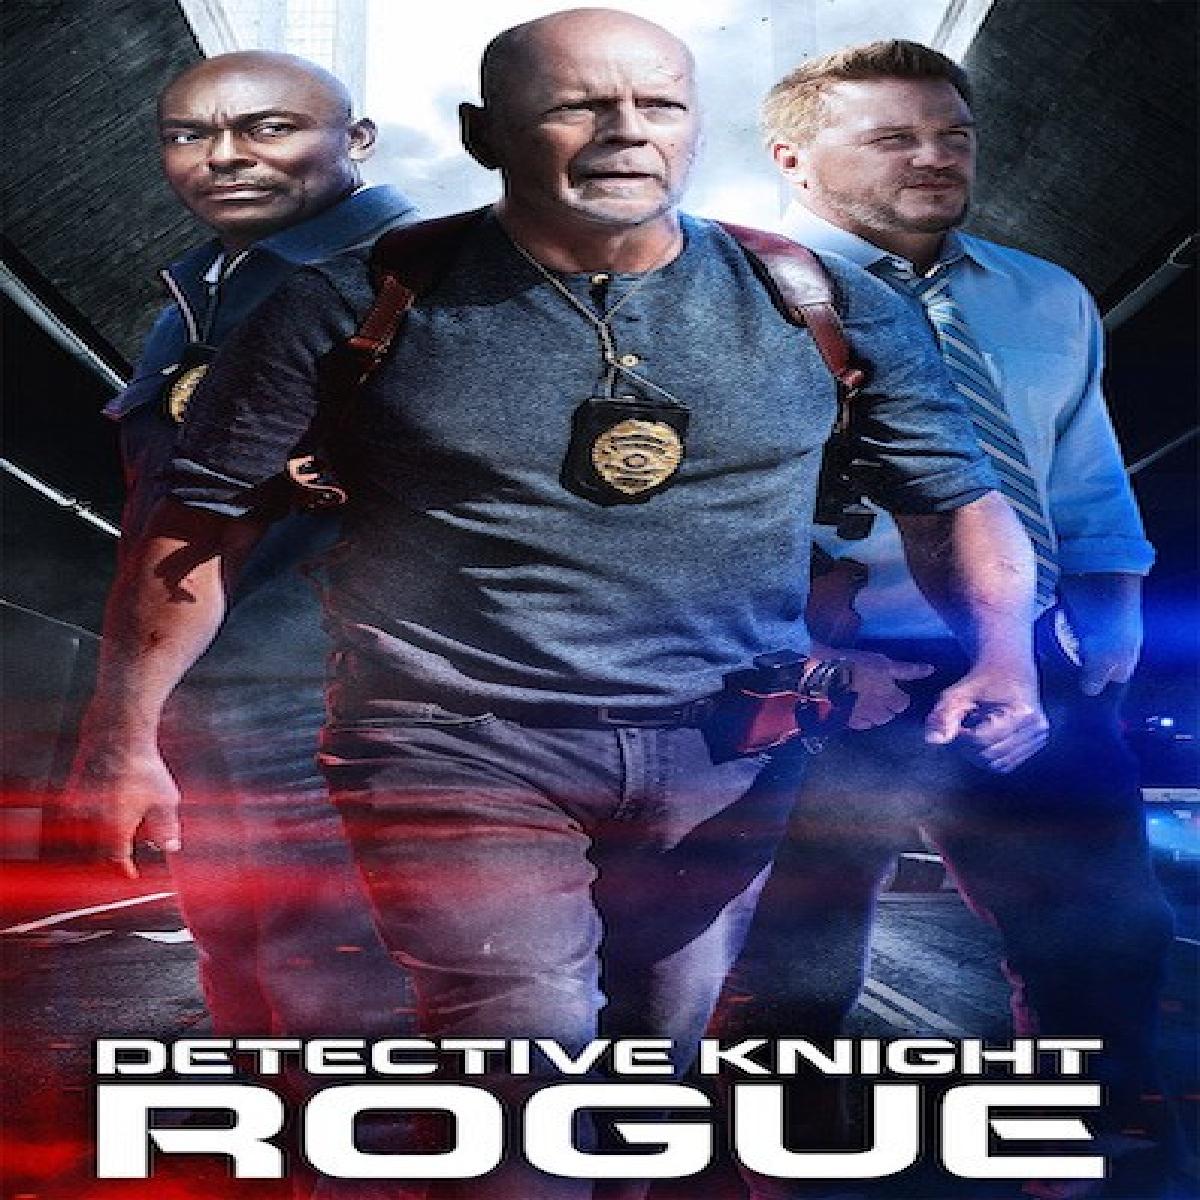 Detective Knight – Rogue Trailer Is Out